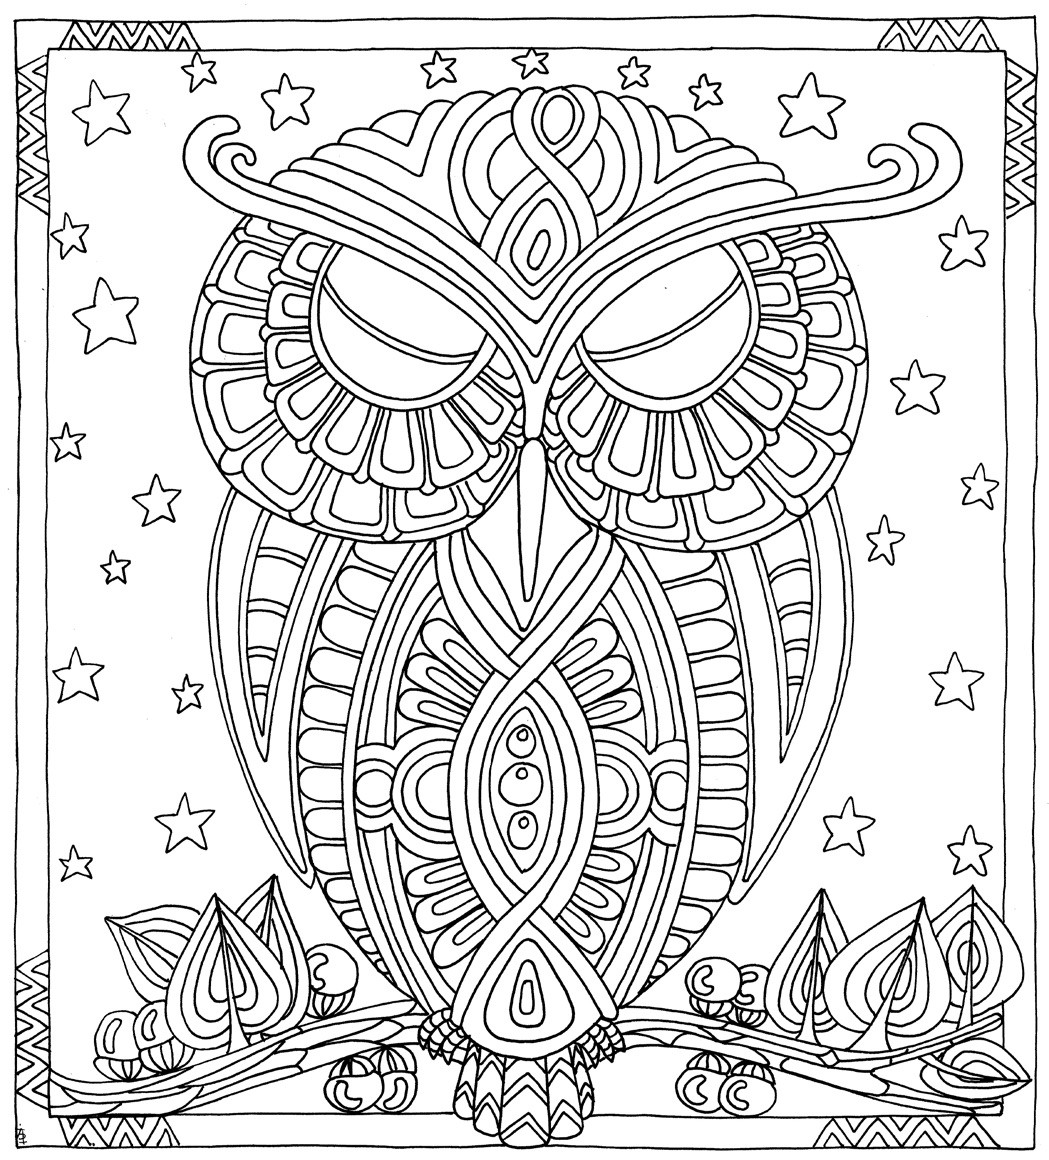 Color Me Coloring Book
 Staying Within the Lines Colouring Your Way to Better Sleep